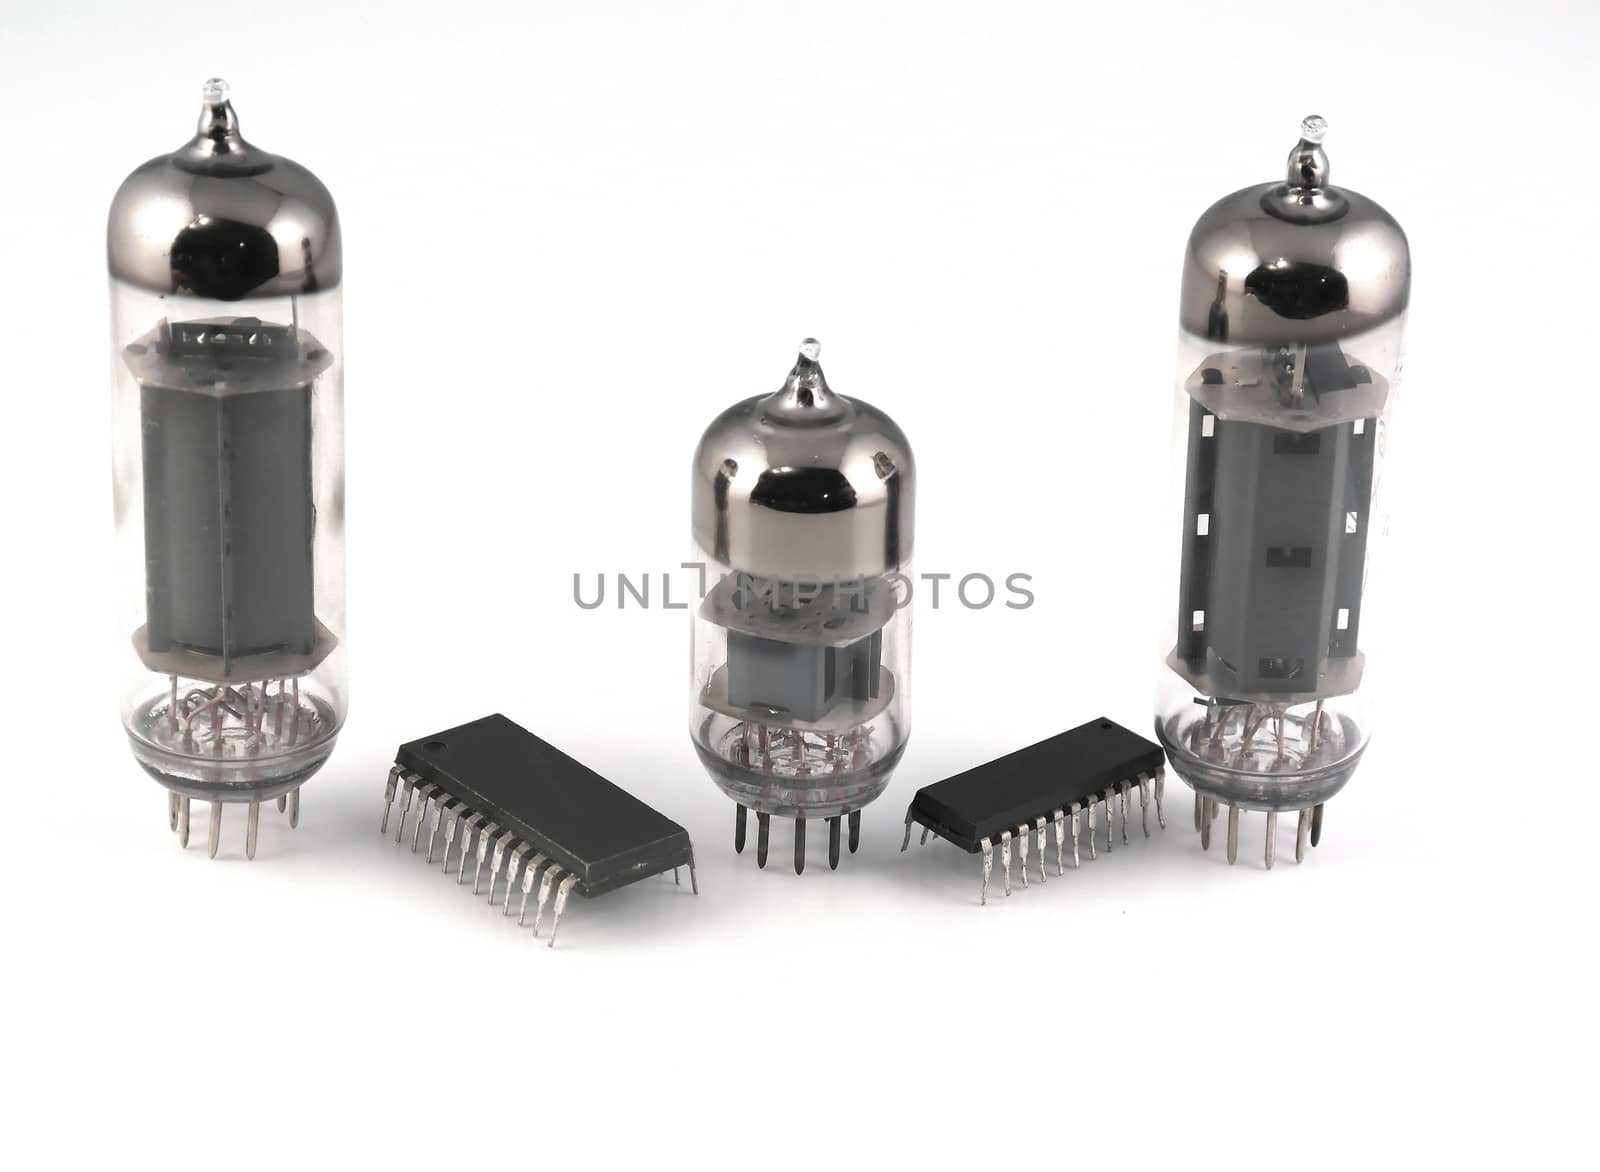 Vacuum radio tubes and microchips by sergpet